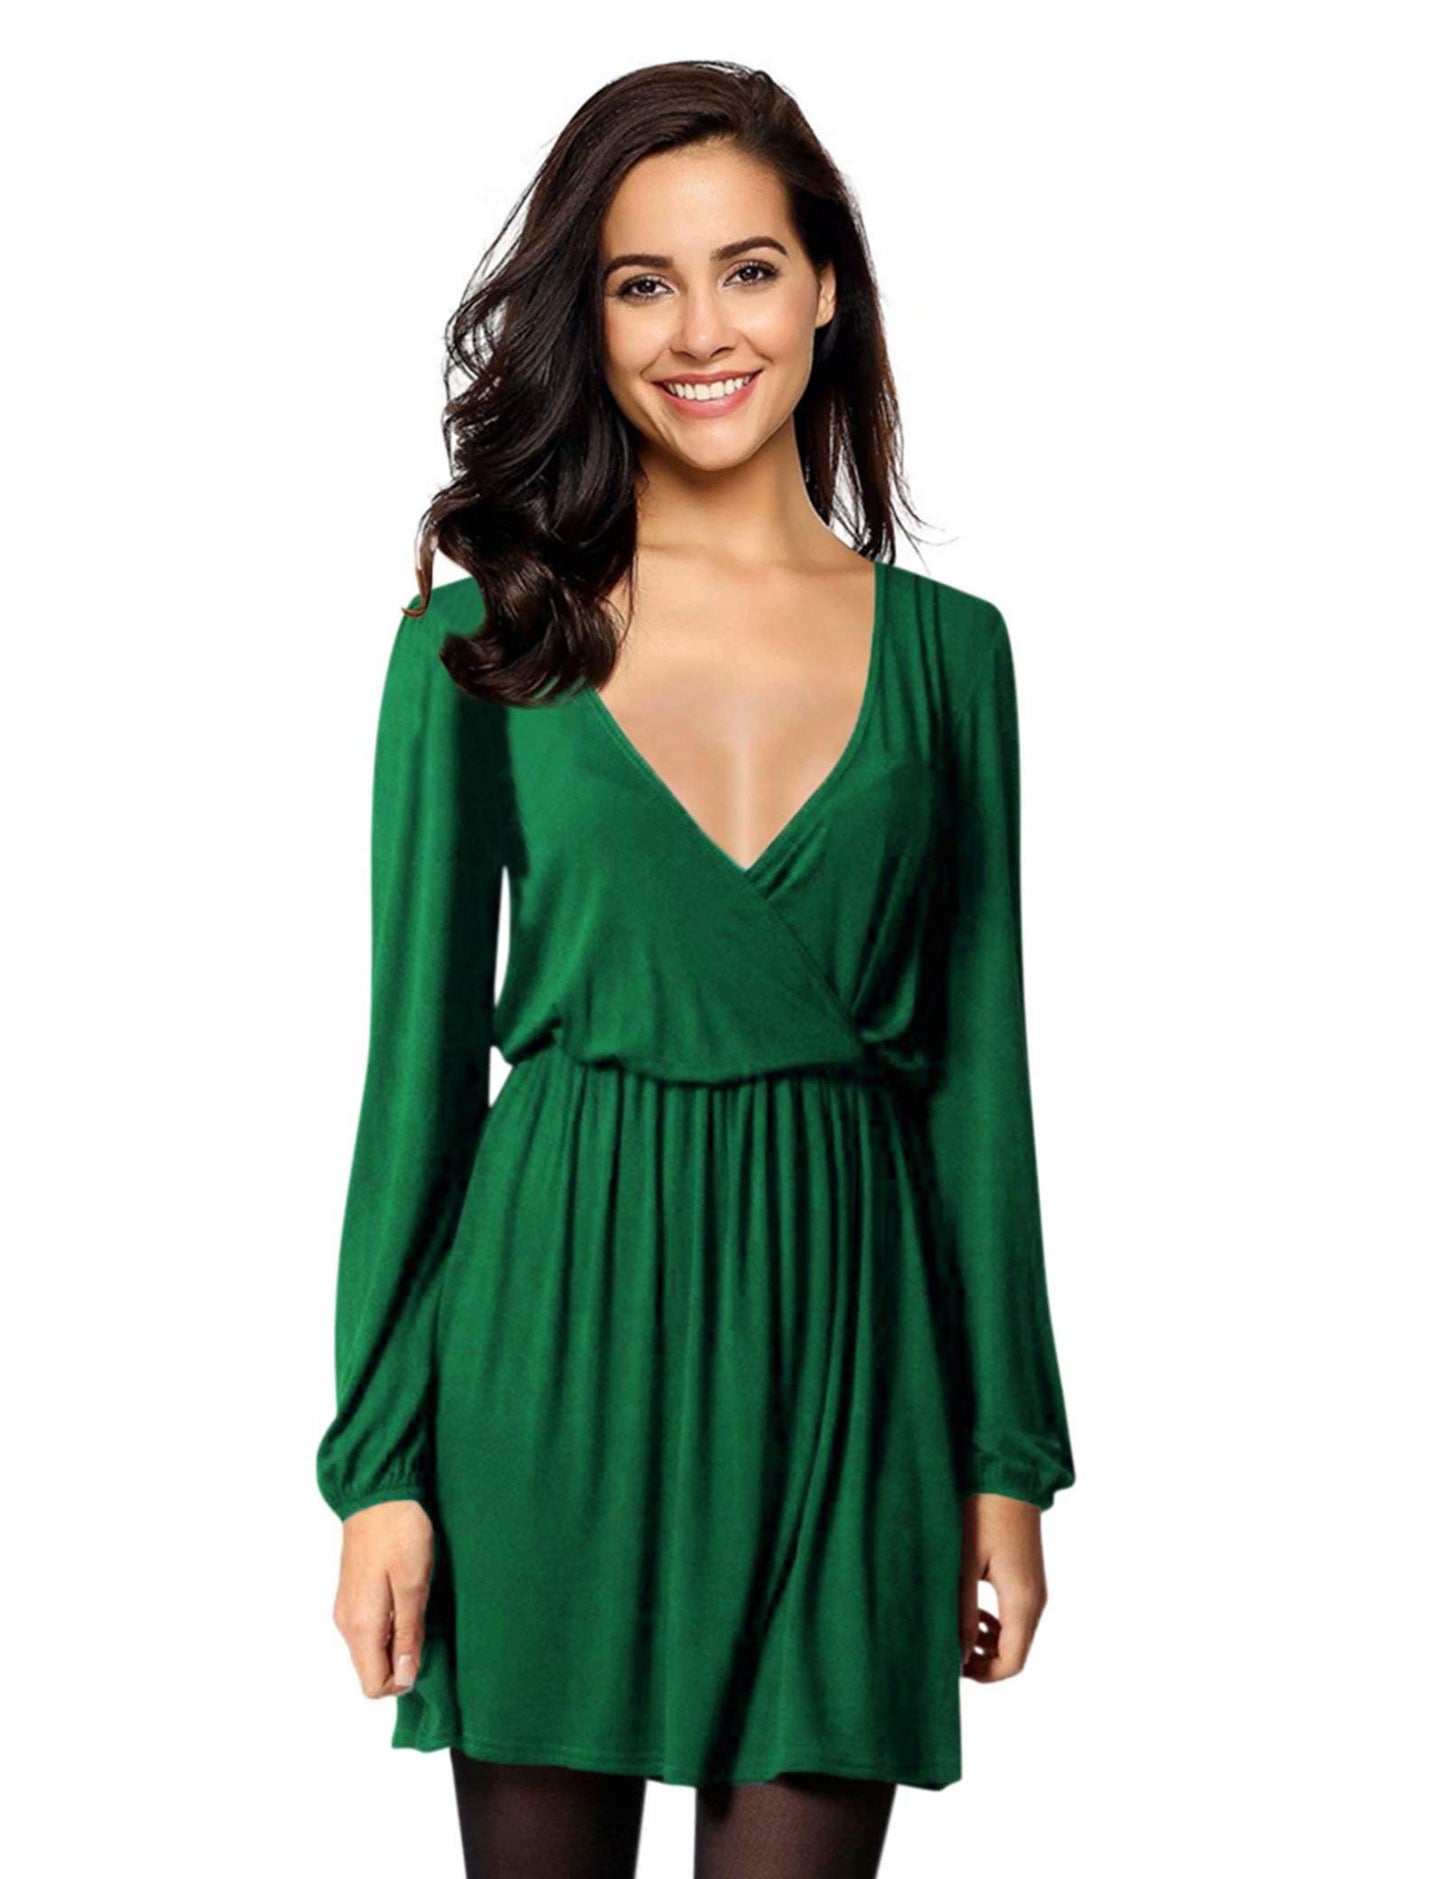 YESFASHION Women V-Neck Business Casual Party Mini Dress